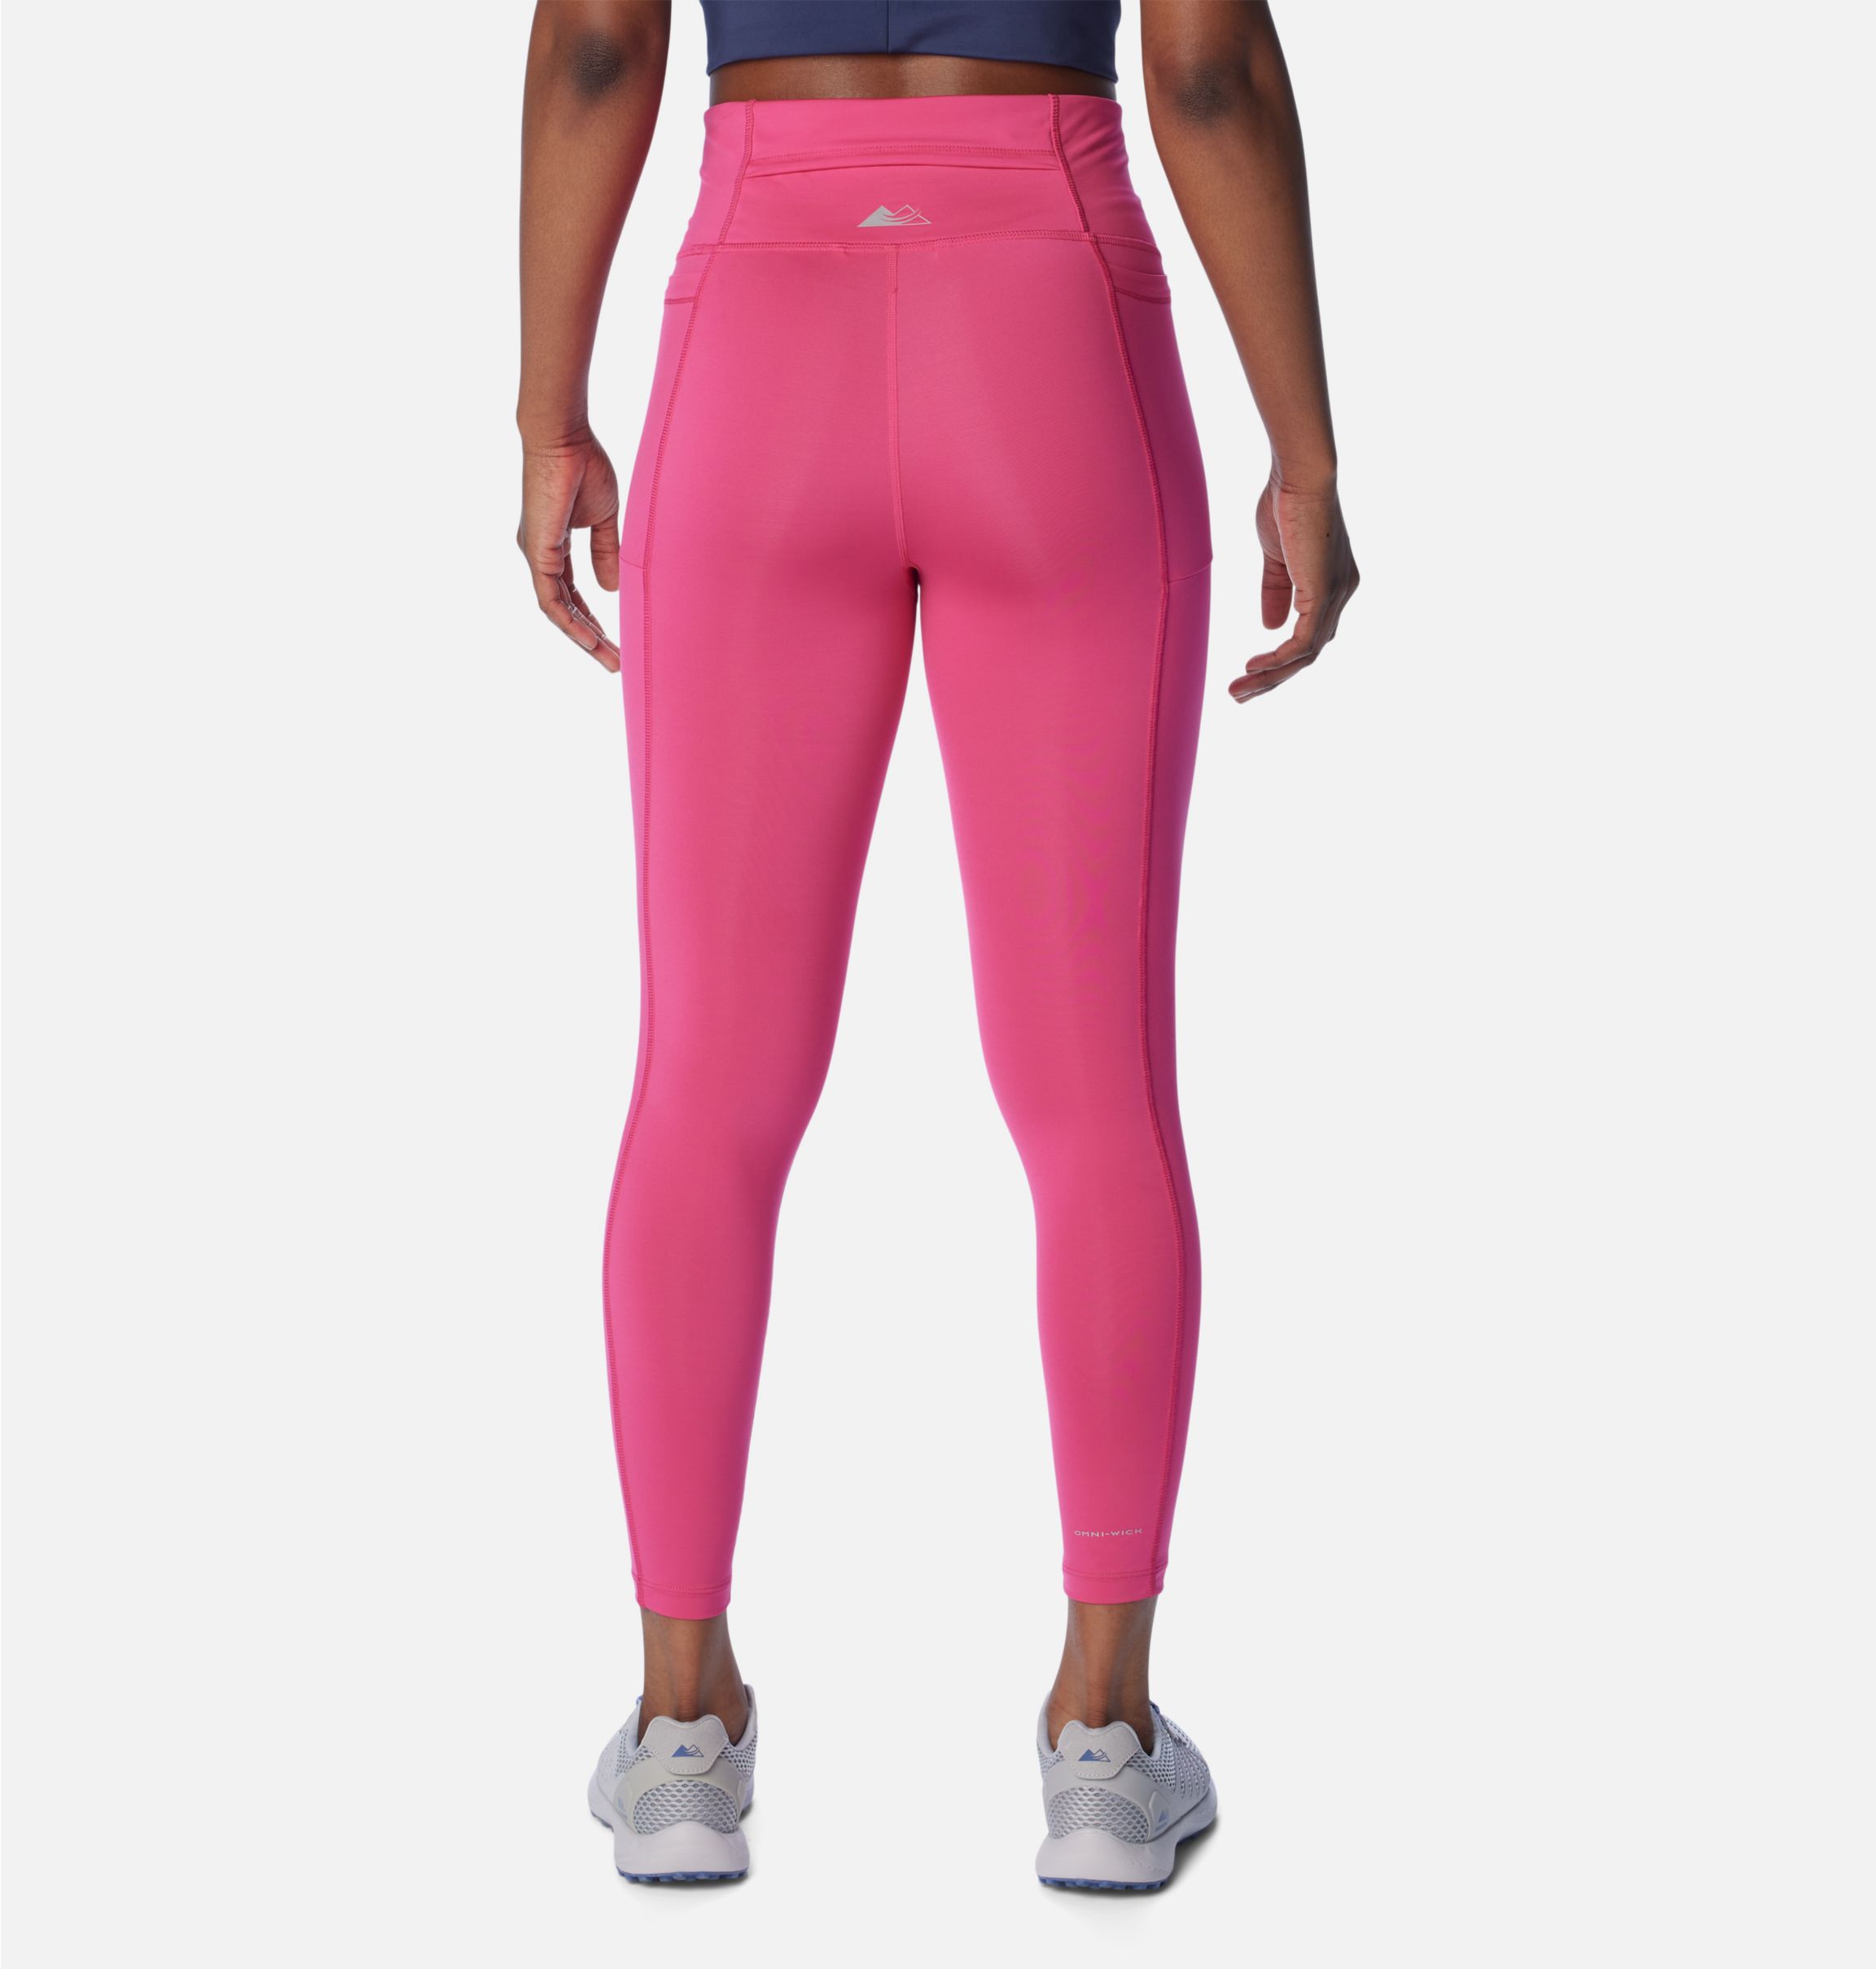 Columbia Endless Trail 7/8 running tights for women Black / XS